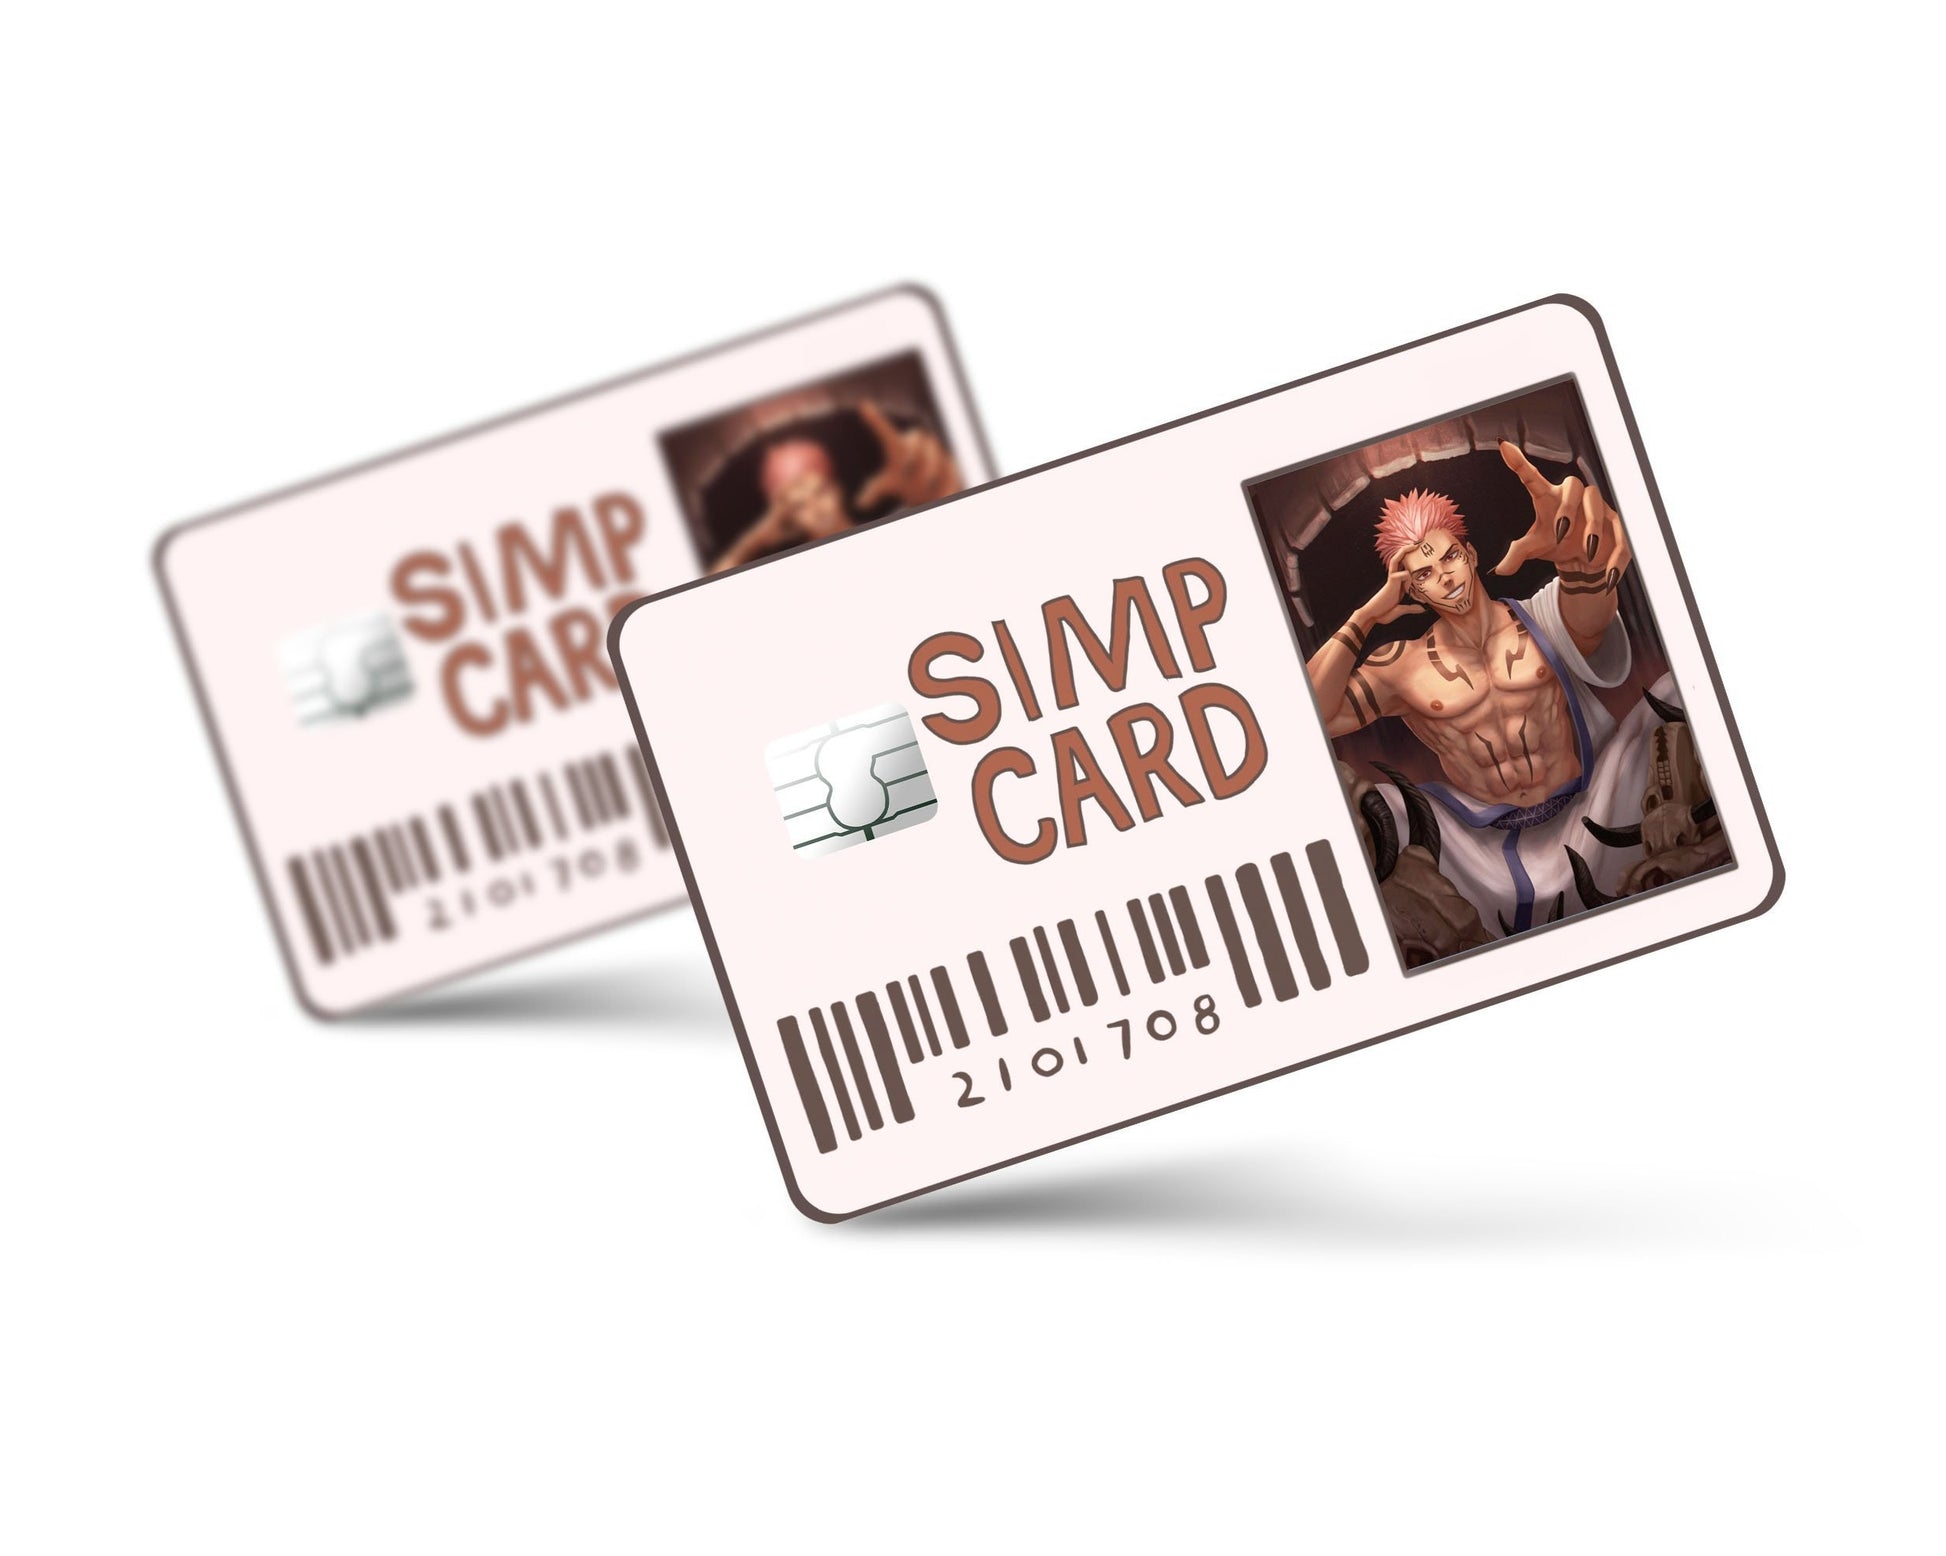 Simp Card - Send in a character! Credit Card Skin – Anime Town Creations